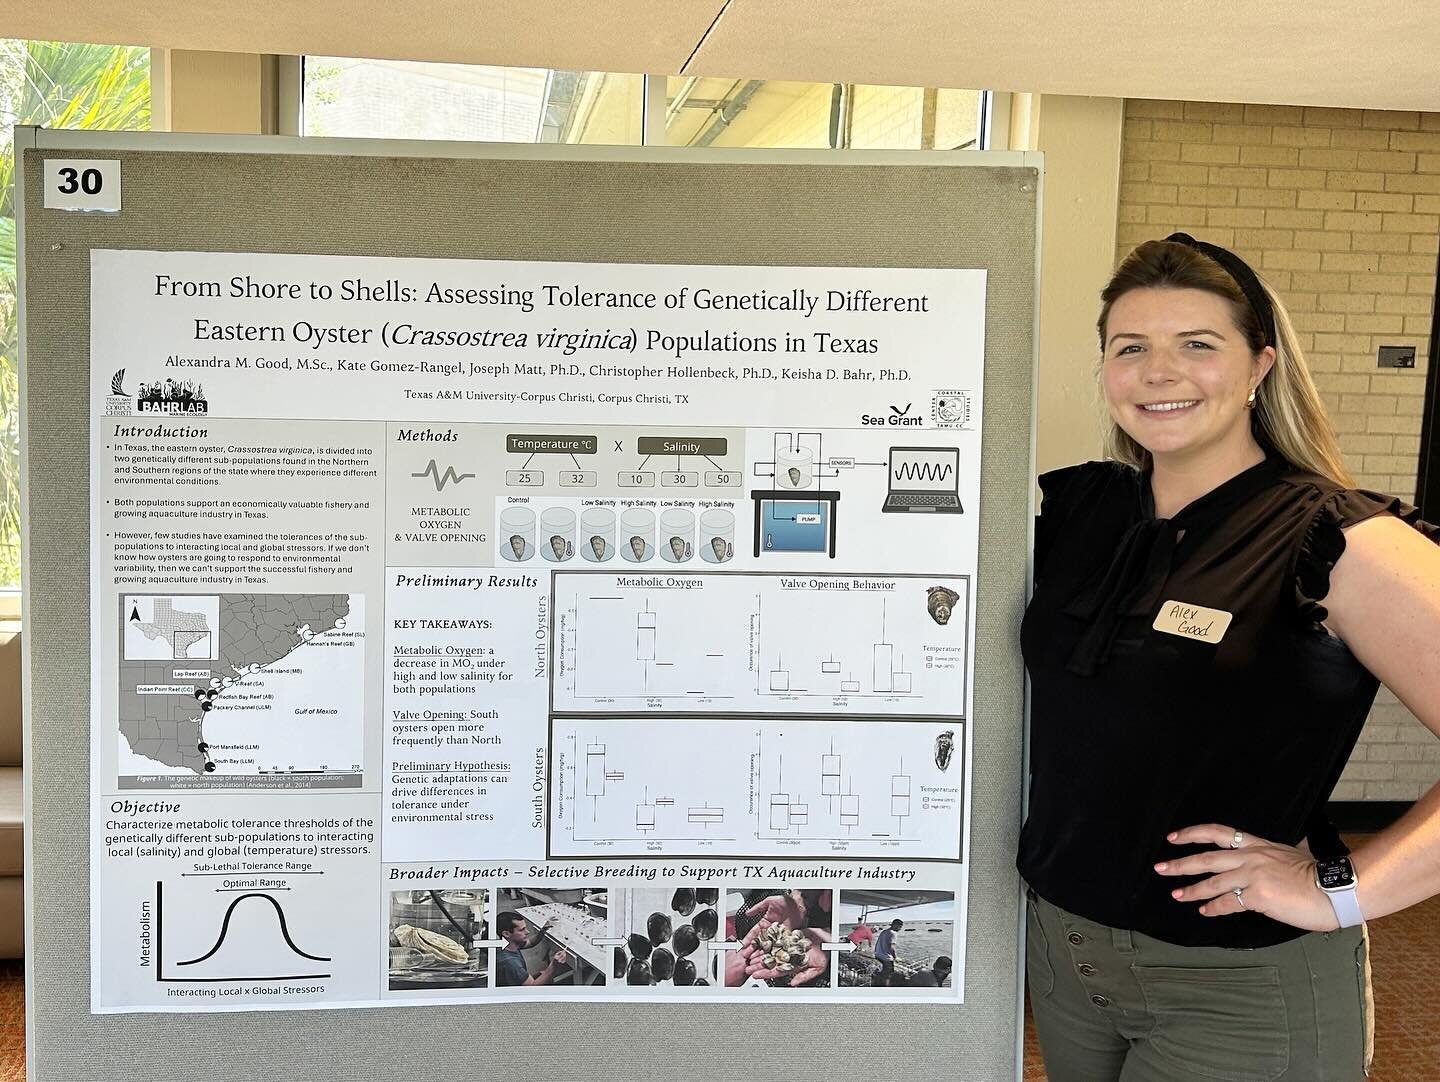 🌟 Happy Friday, Folks! 🌟

The Bahr Lab attended the 14th annual Texas Bays &amp; Estuaries Meeting hosted by The University of Texas Marine Science Institute. Alexandra Good and Kelley Savage presented their groundbreaking research, making connecti